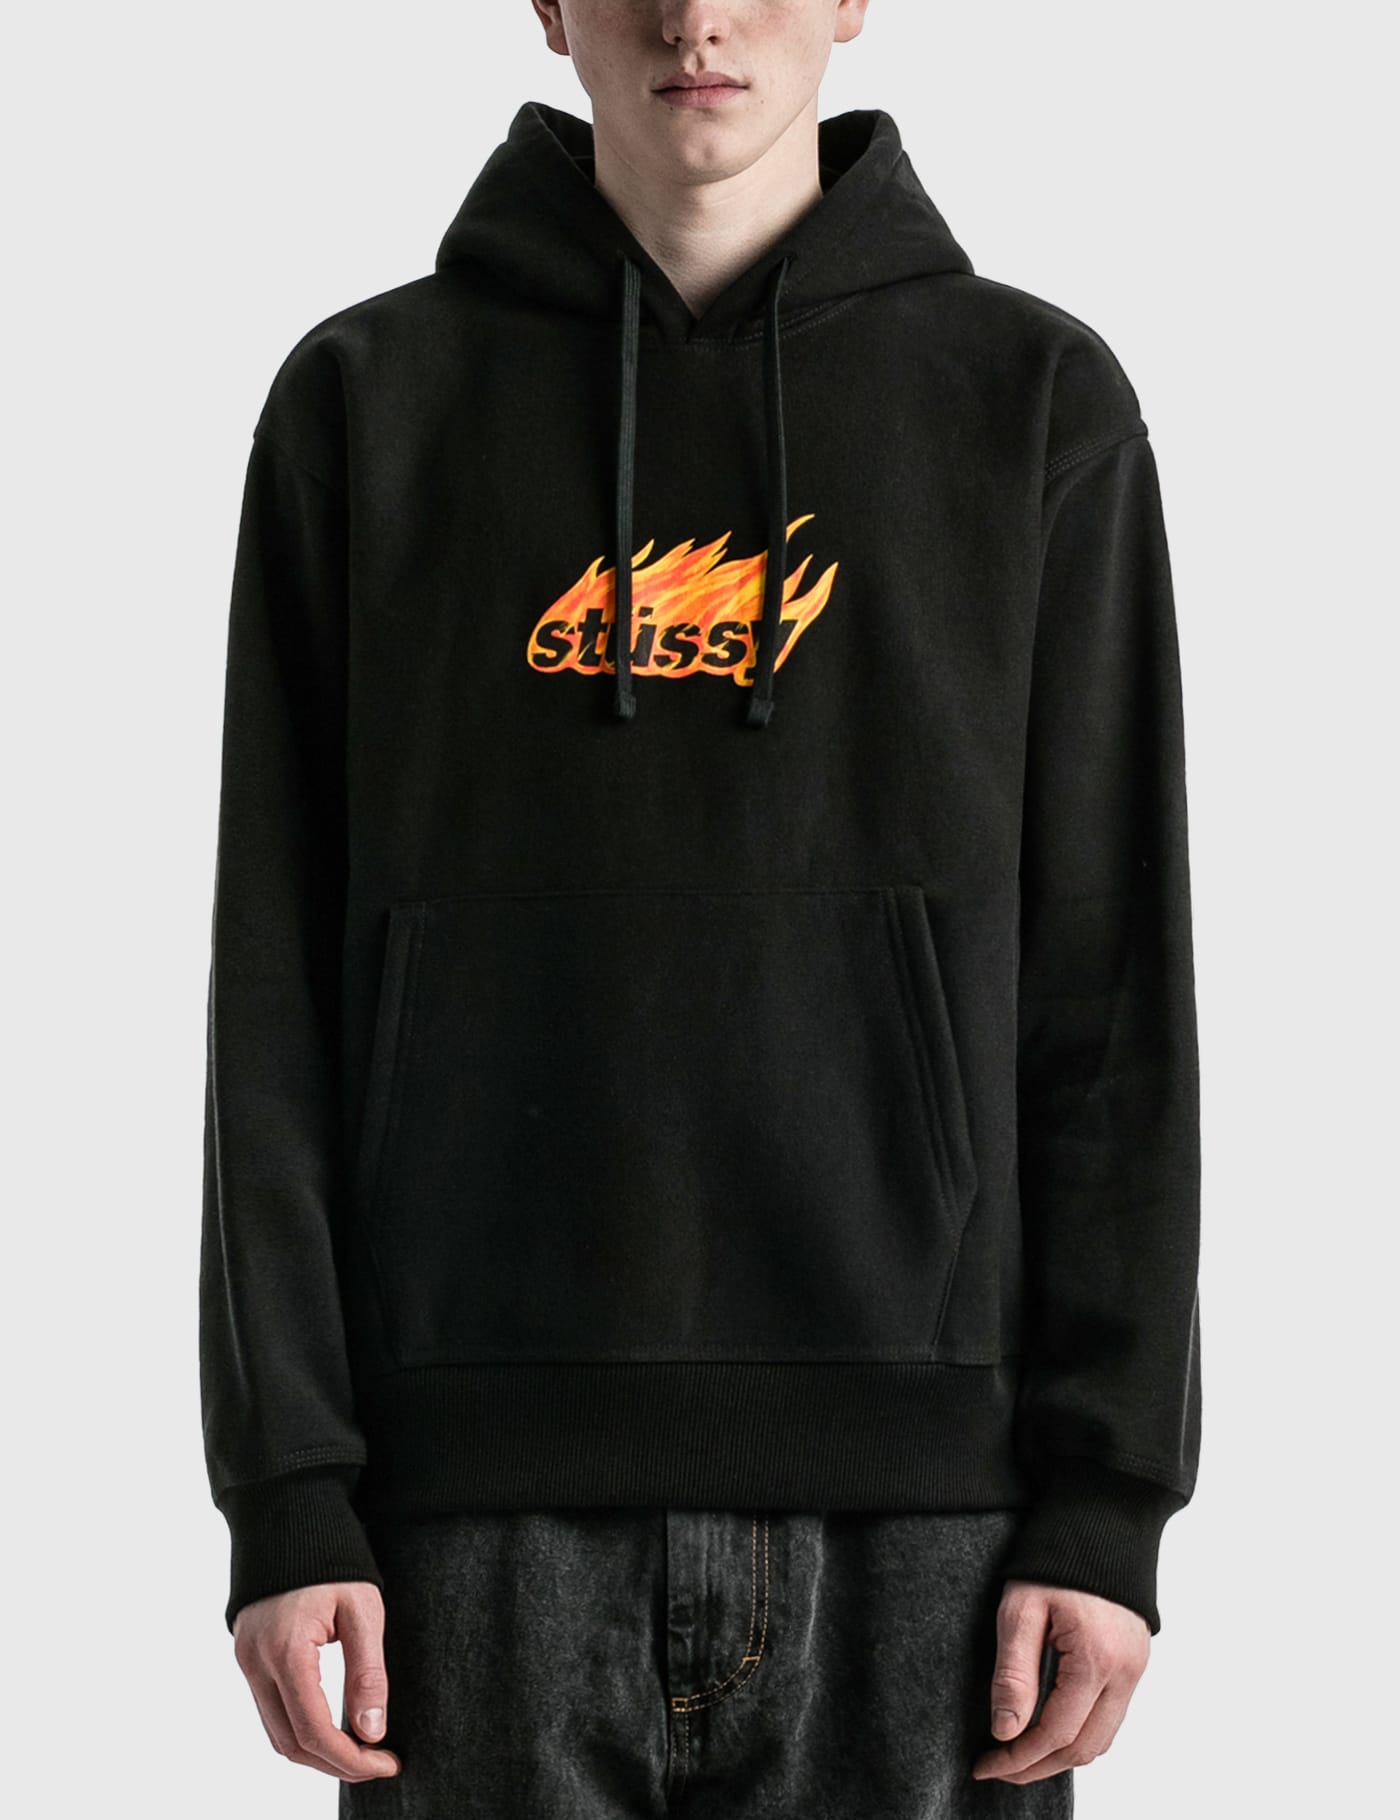 Stüssy - Flames Hoodie | HBX - Globally Curated Fashion and